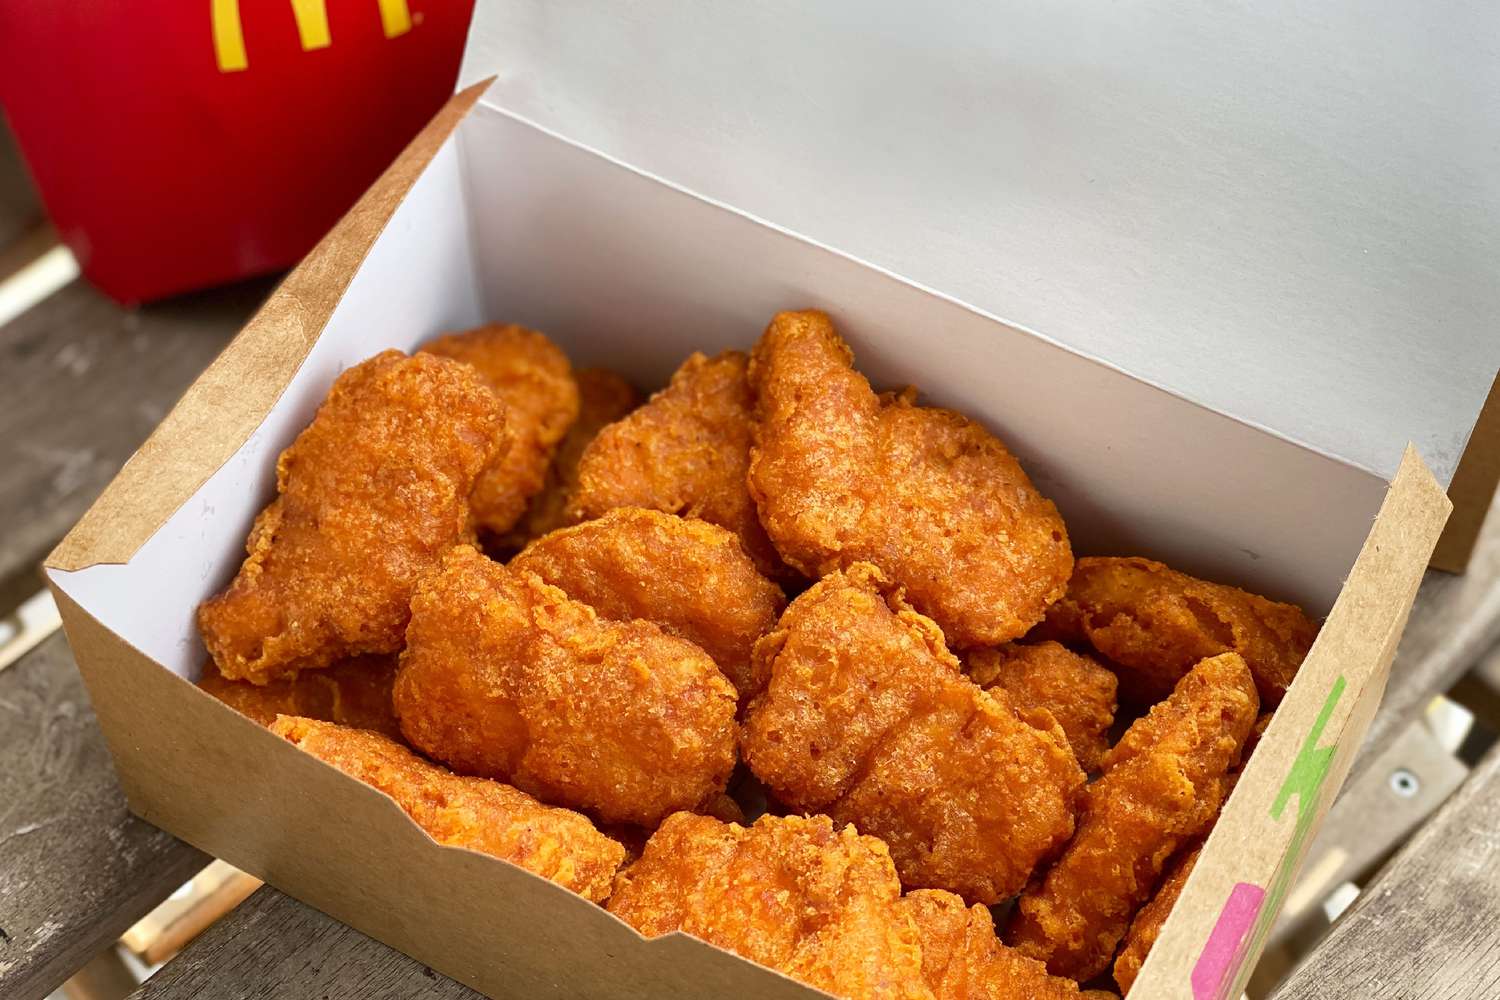 20 Mcdonald'S Chicken Nuggets Nutrition Facts - Facts.net